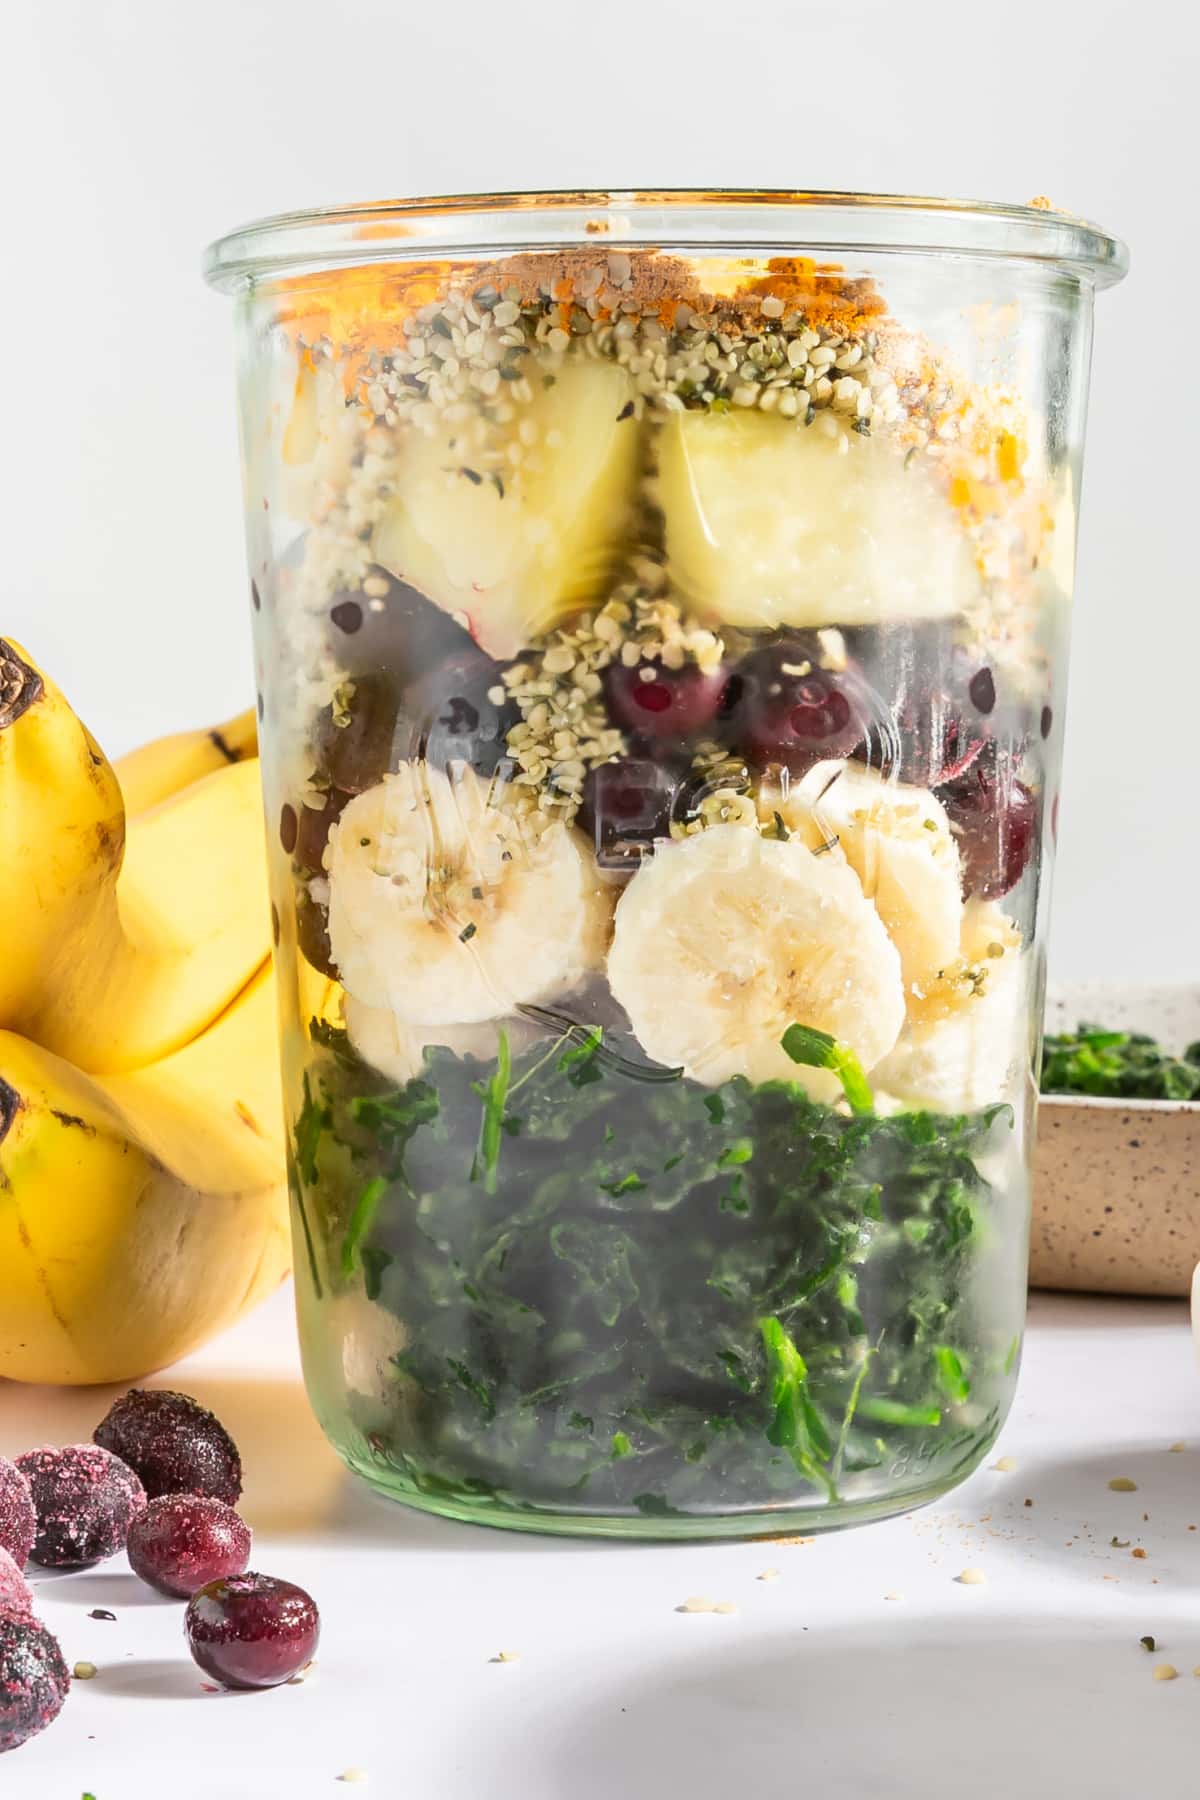 A large glass jar of smoothie ingredients for meal prepping: spinach, banana, pineapple, blueberries, hemp seeds, ground ginger, ground turmeric.